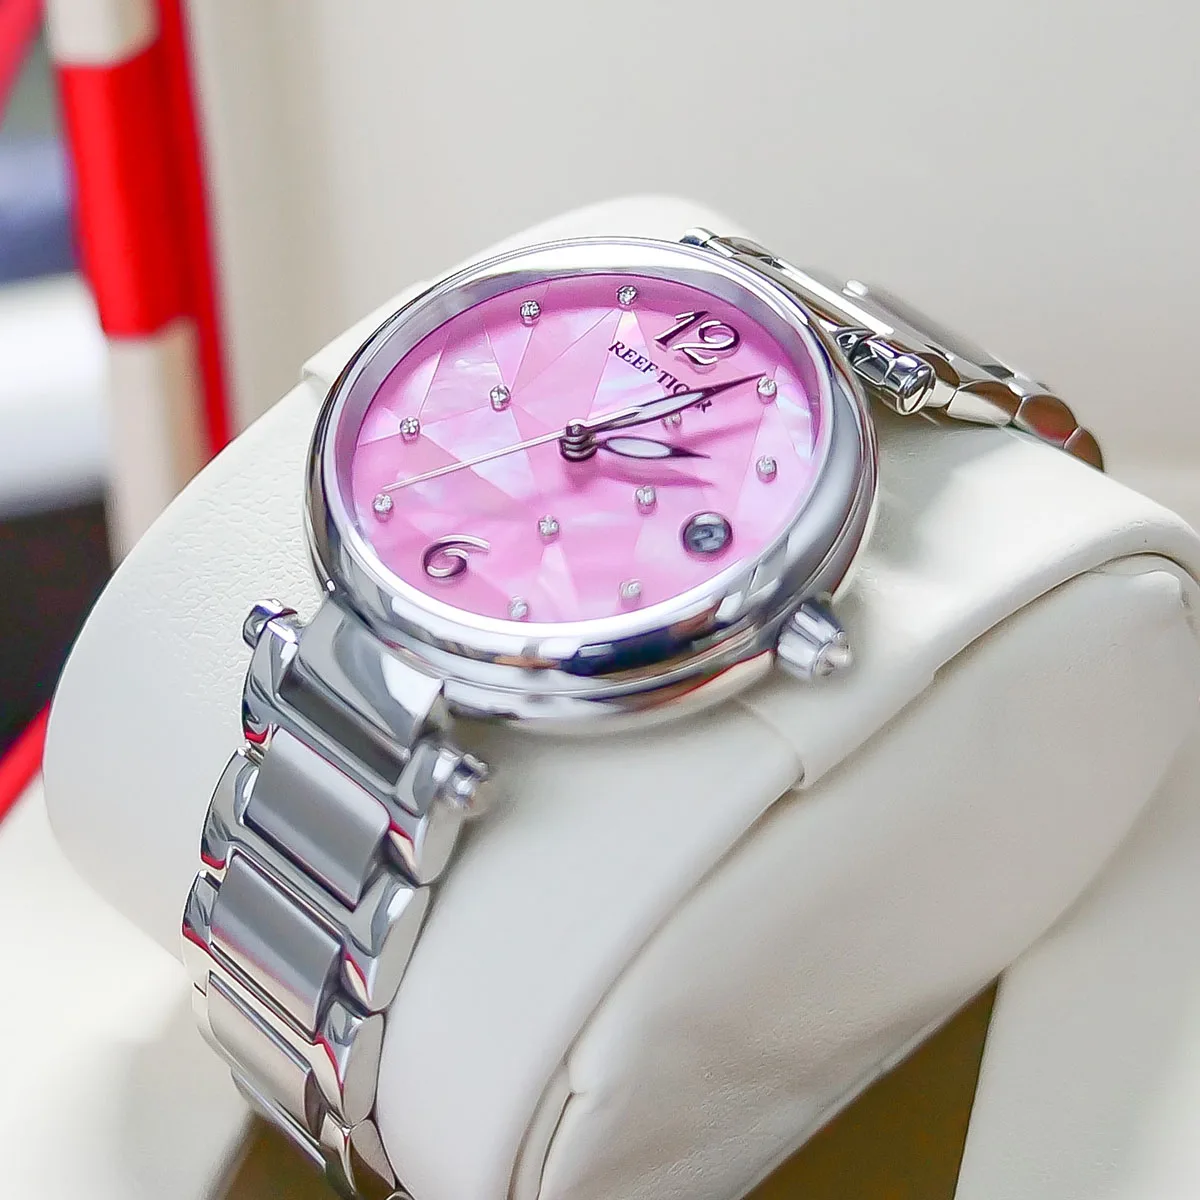 Reef Tiger/RT New Design Luxury Stainless Steel Pink Dial Automatic Watches Women Rose Silver Steel Strip Watch RGA1584 enlarge